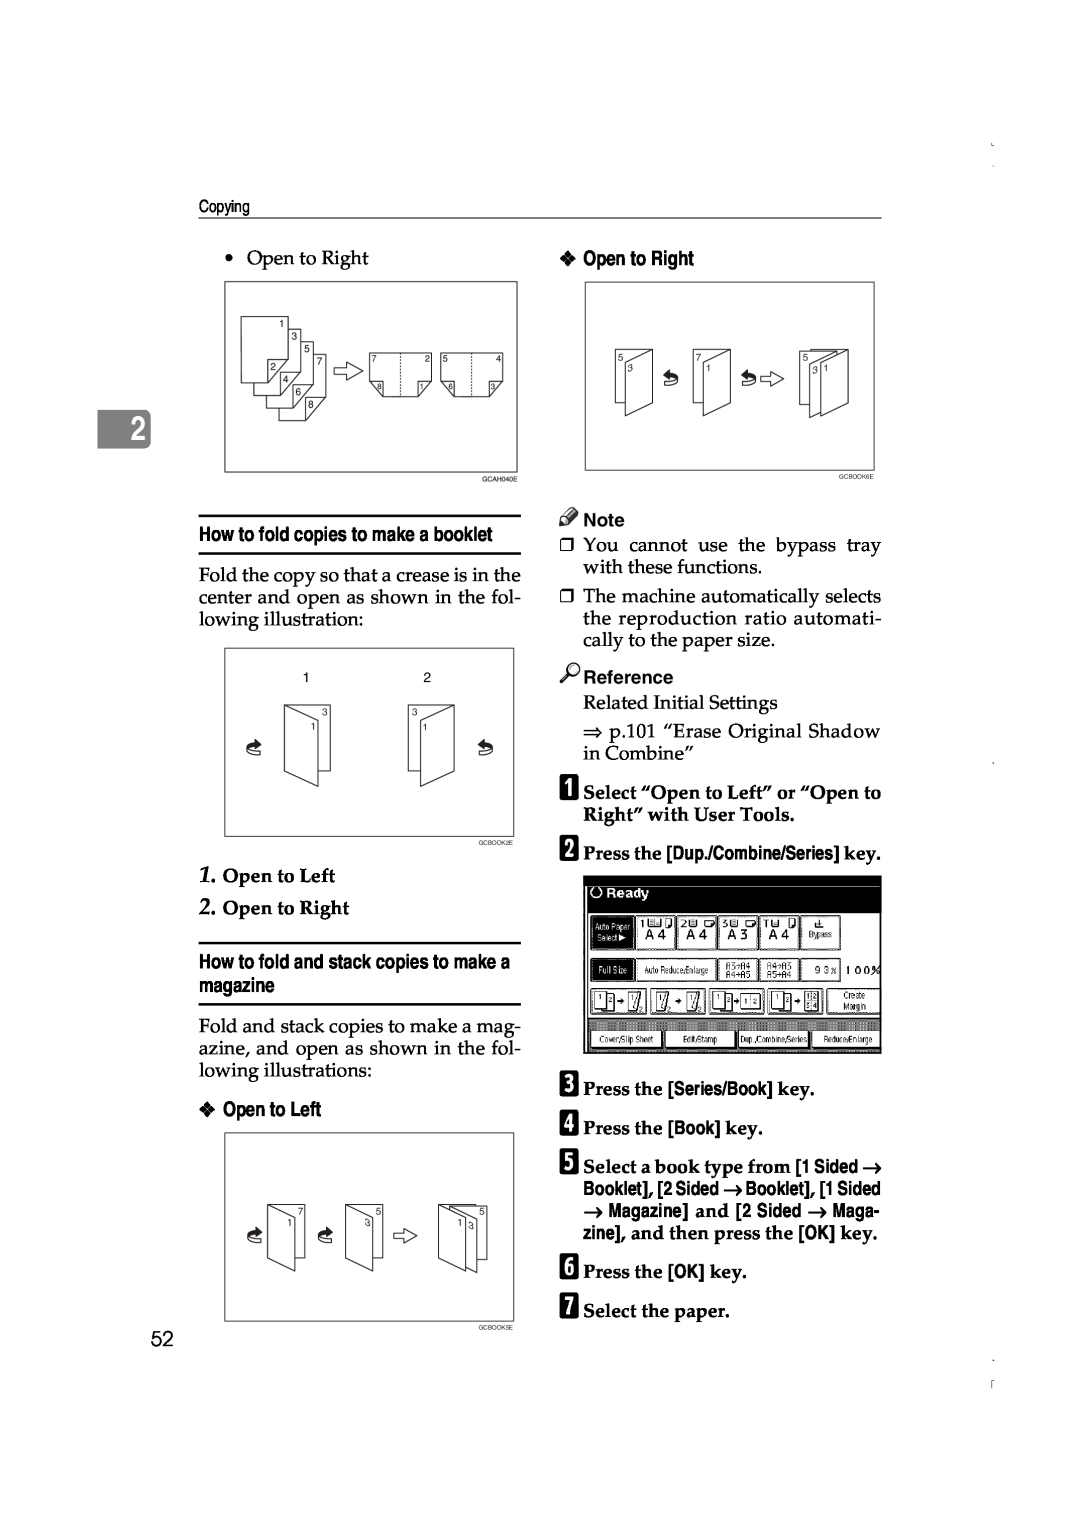 Lanier LD075, LD060 manual How to fold and stack copies to make a magazine, Open to Left 2. Open to Right, Reference 